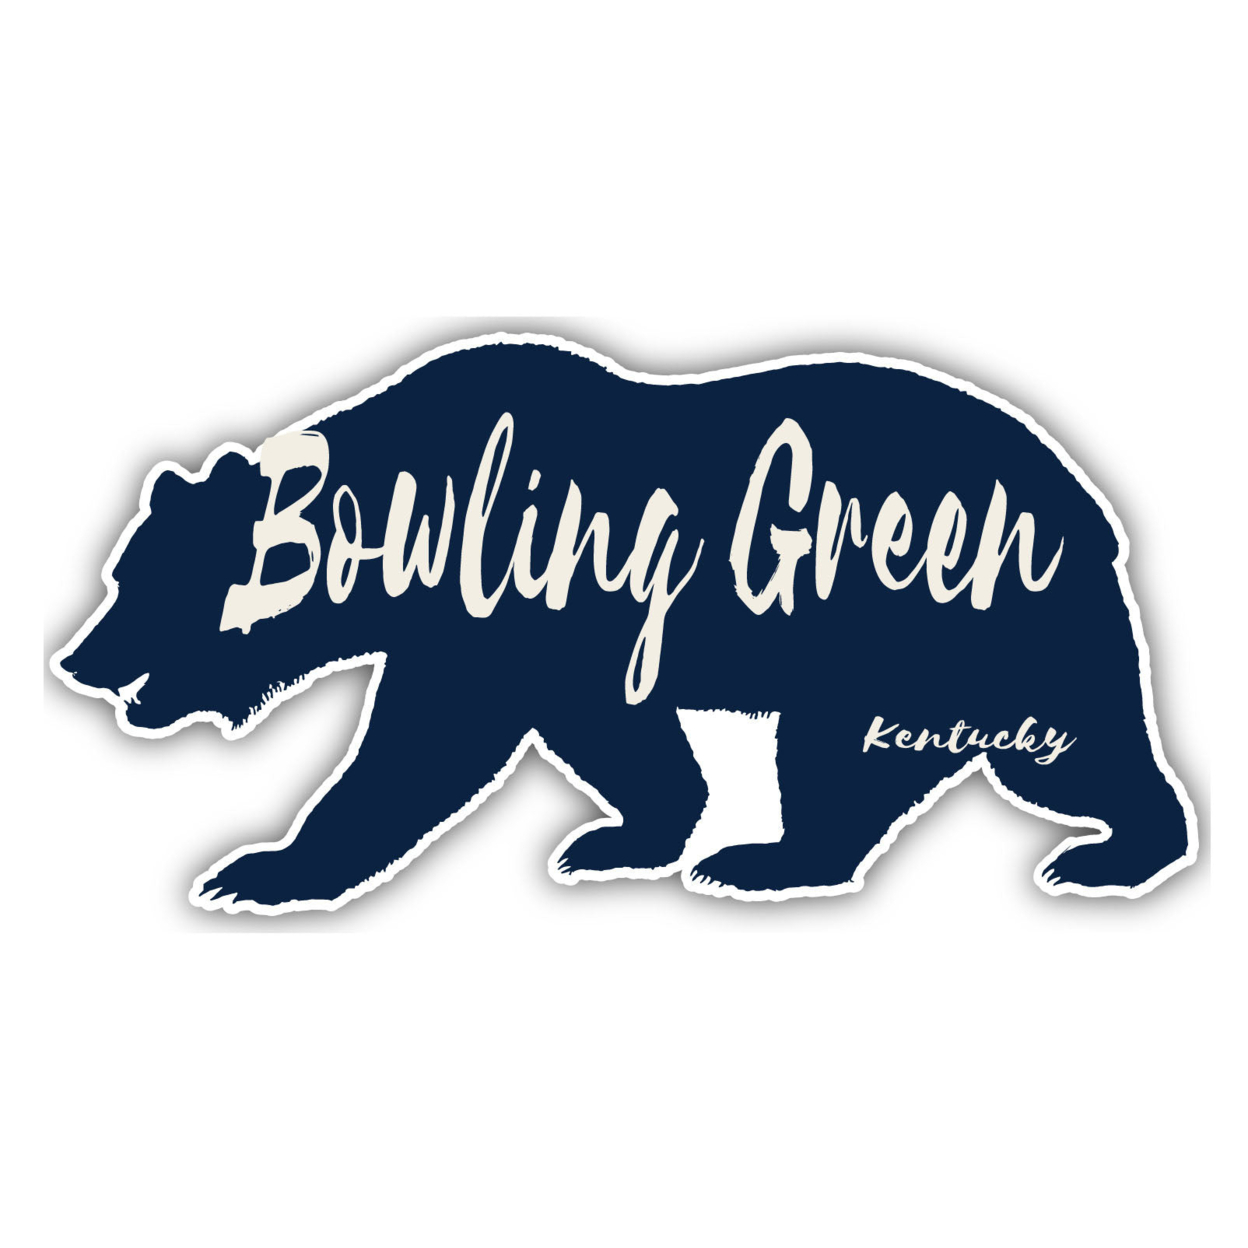 Bowling Green Kentucky Souvenir Decorative Stickers (Choose Theme And Size) - 4-Pack, 12-Inch, Bear